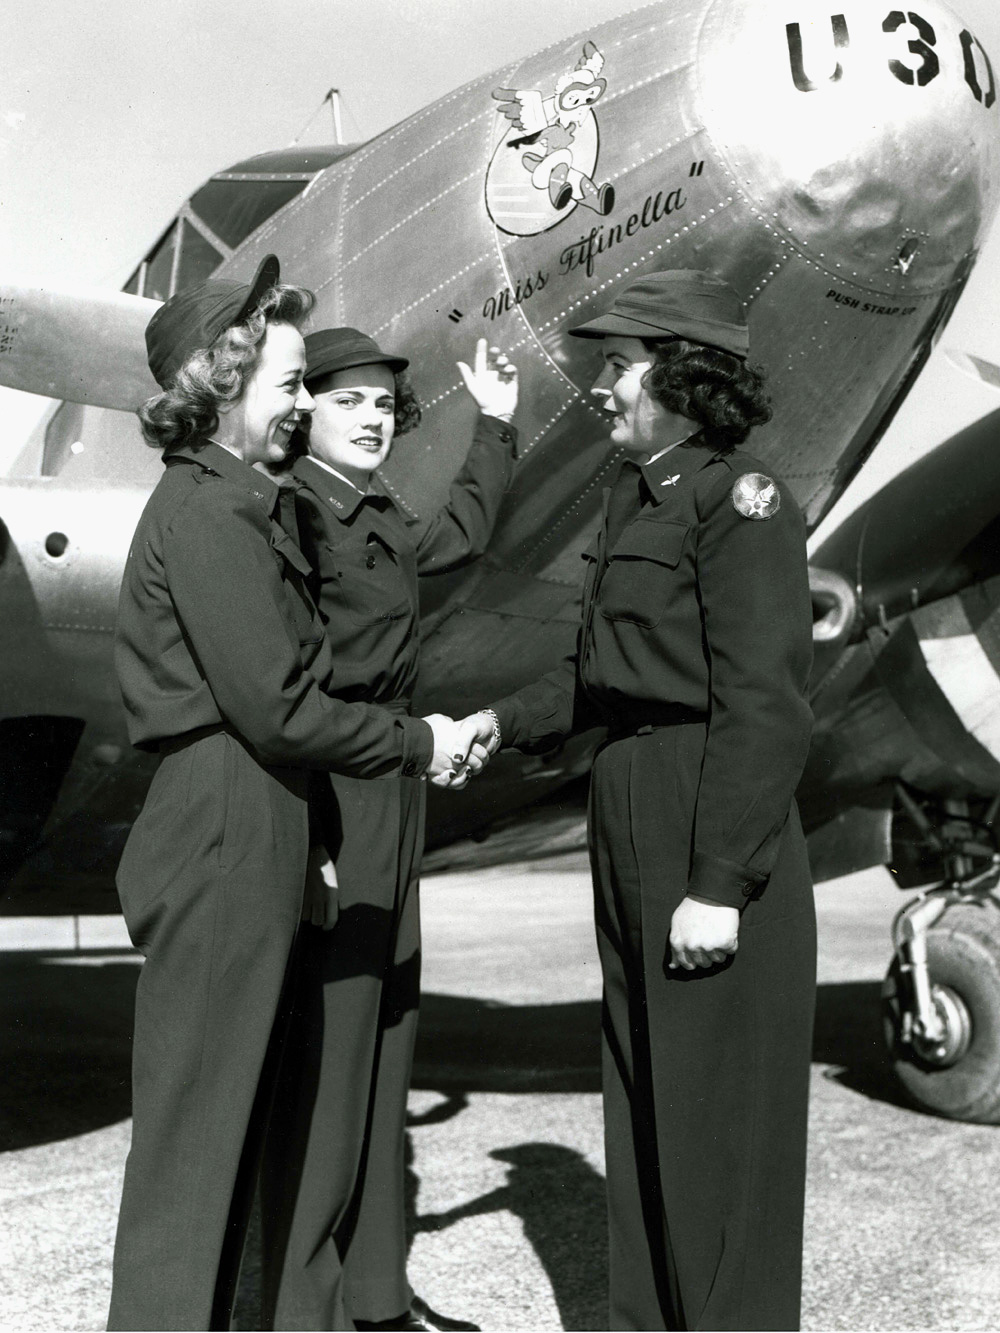 WASP pilots in front of the squadron Beech C-45 Expeditor, “Miss Fifinella,” named in honor of the WASP mascot, 1944, location uncertain but likely Avenger Field, Sweetwater, Texas, United States.